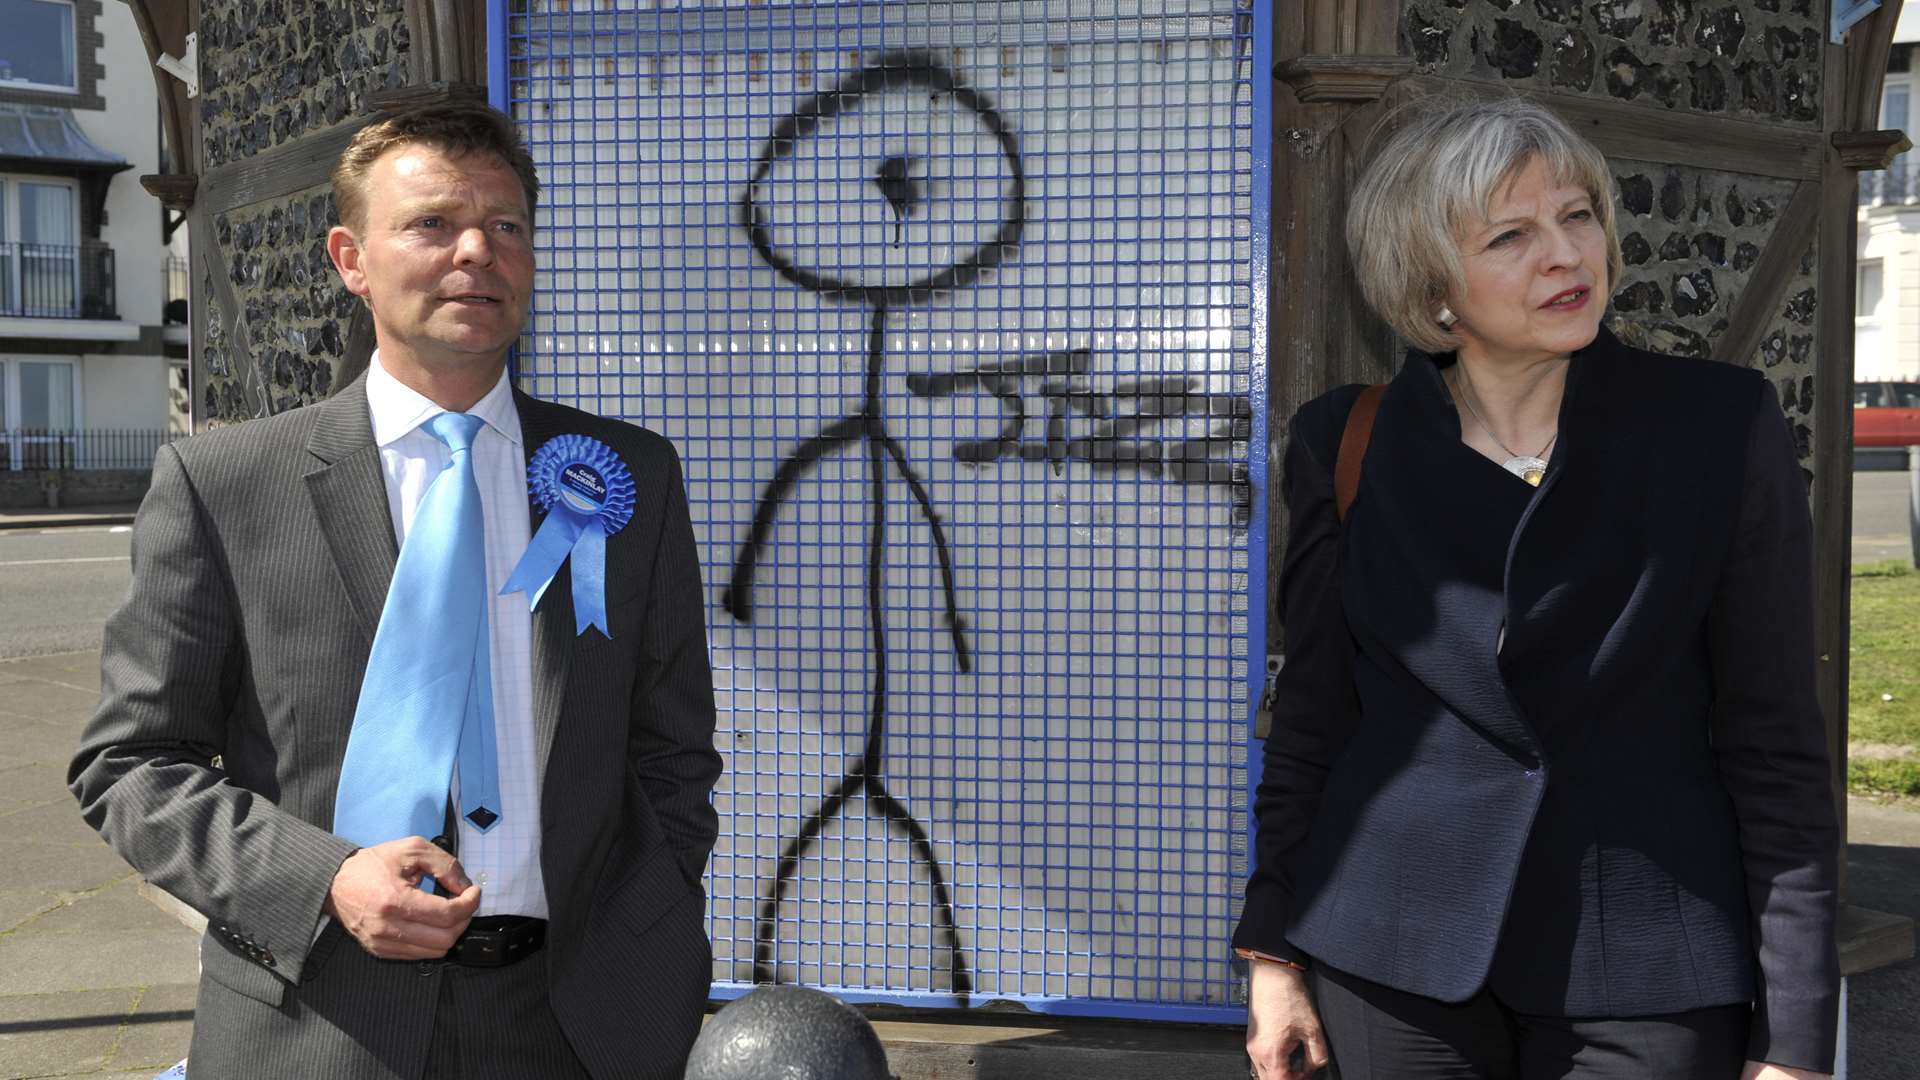 Theresa May visited Thanet South with Conservative candidate Craig Mackinlay